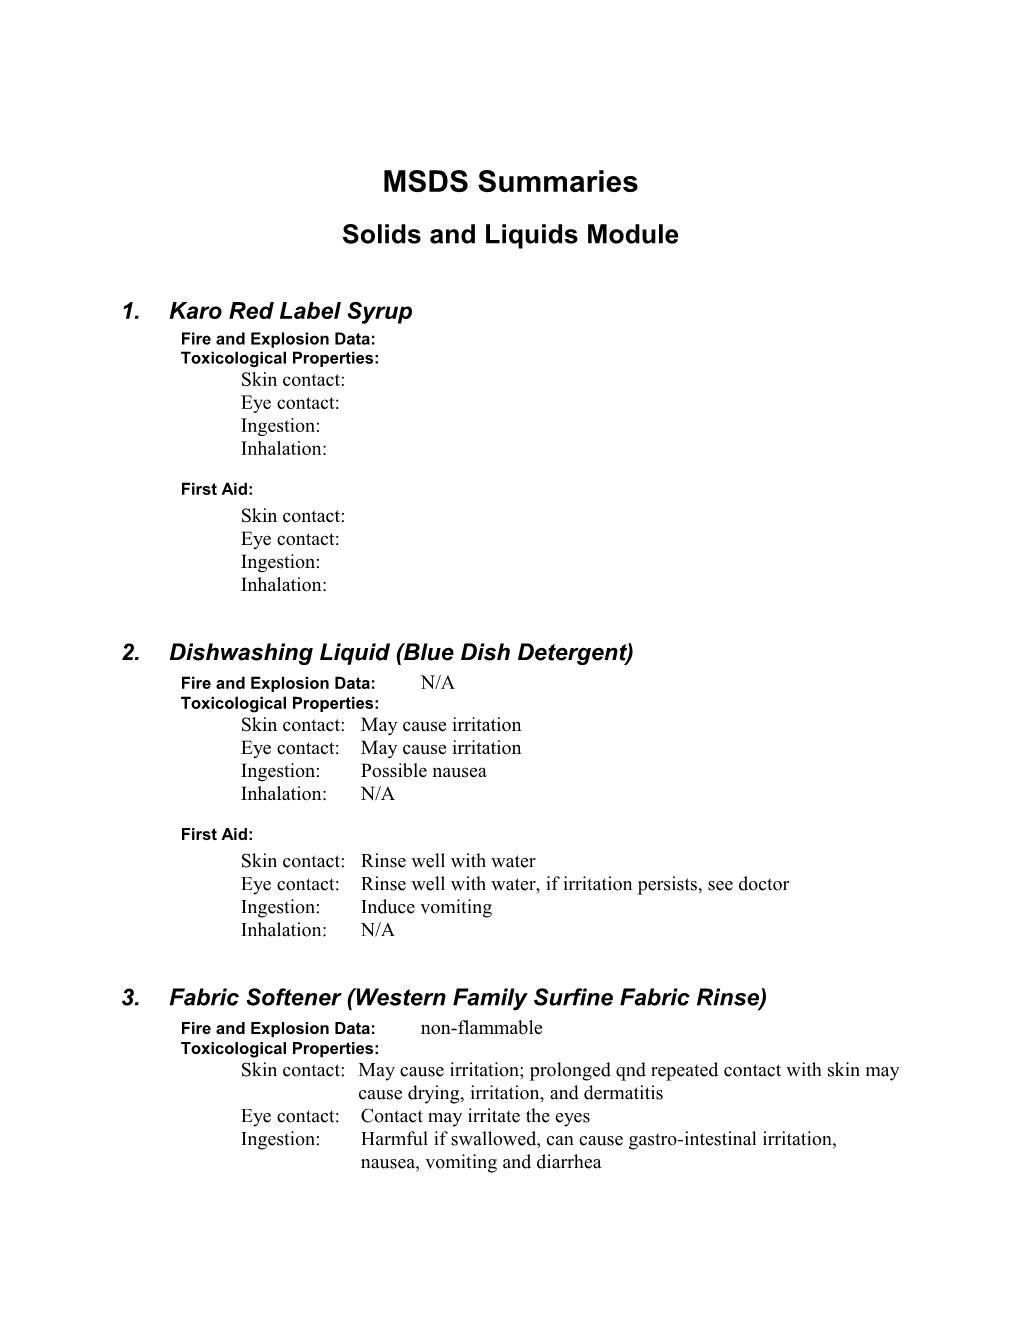 MSDS Summaries Page 3 of 3